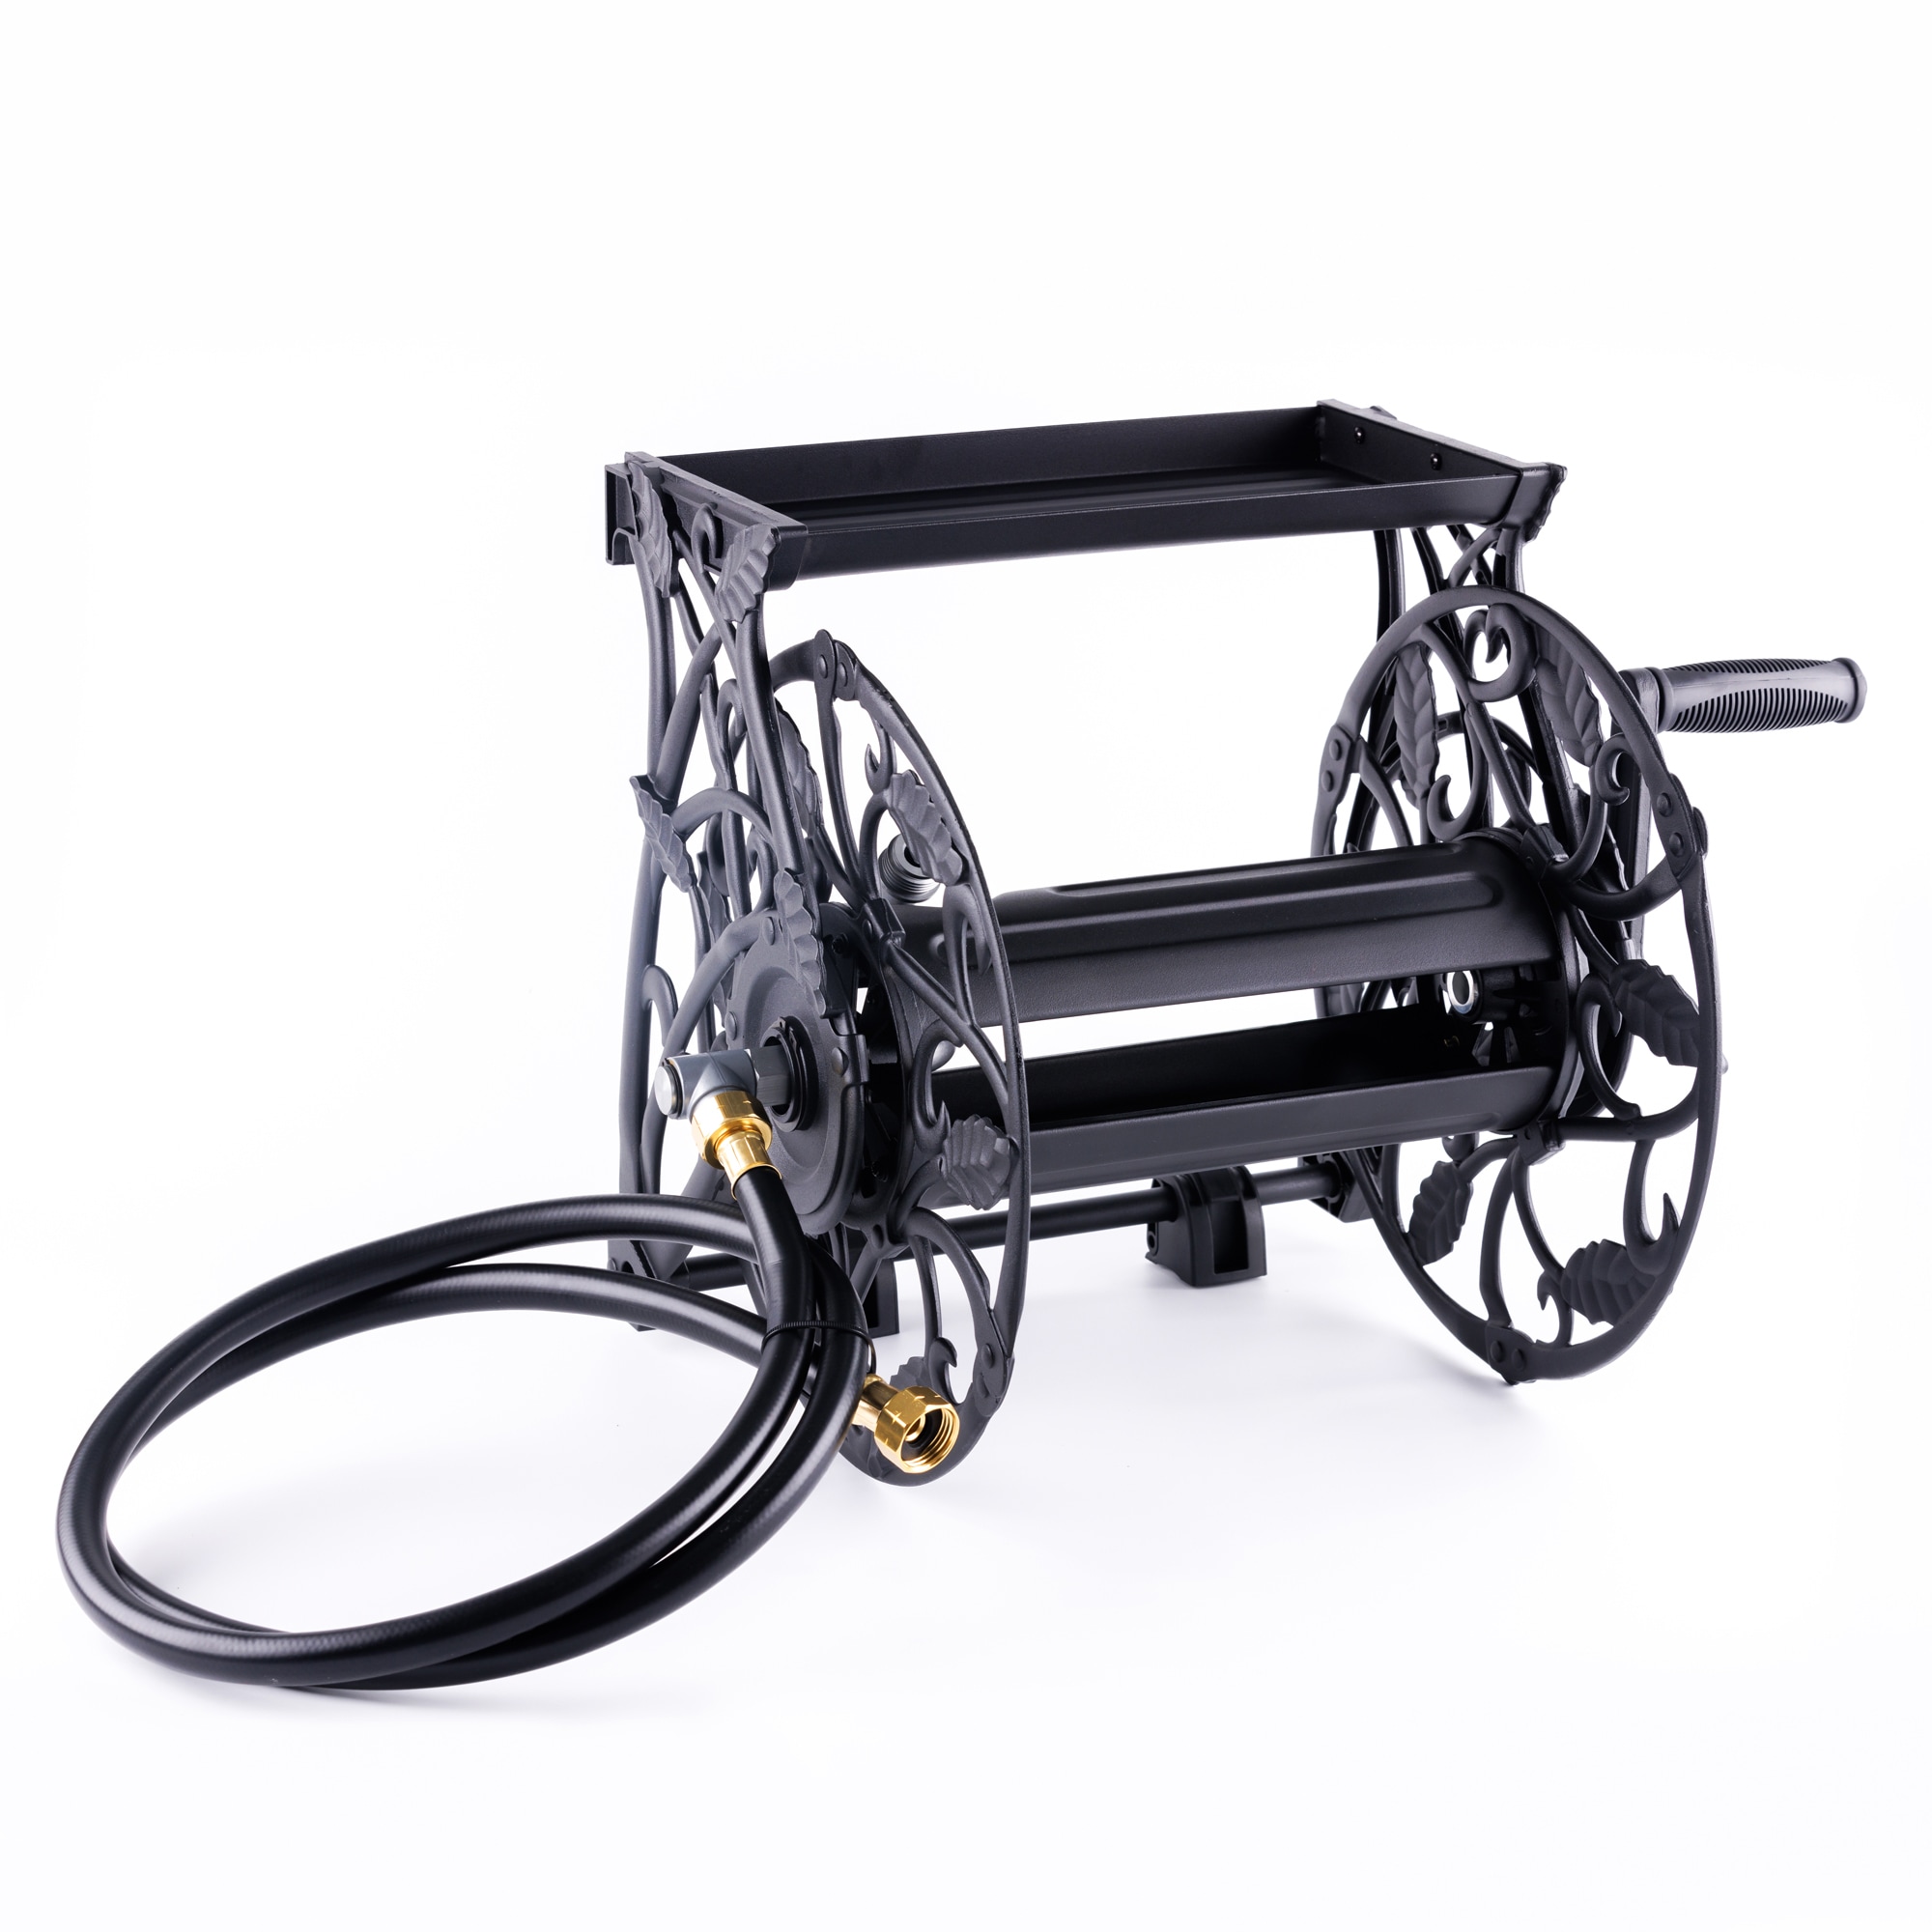 Style Selections Steel 125-ft Wall-mount Hose Reel Lowes.com